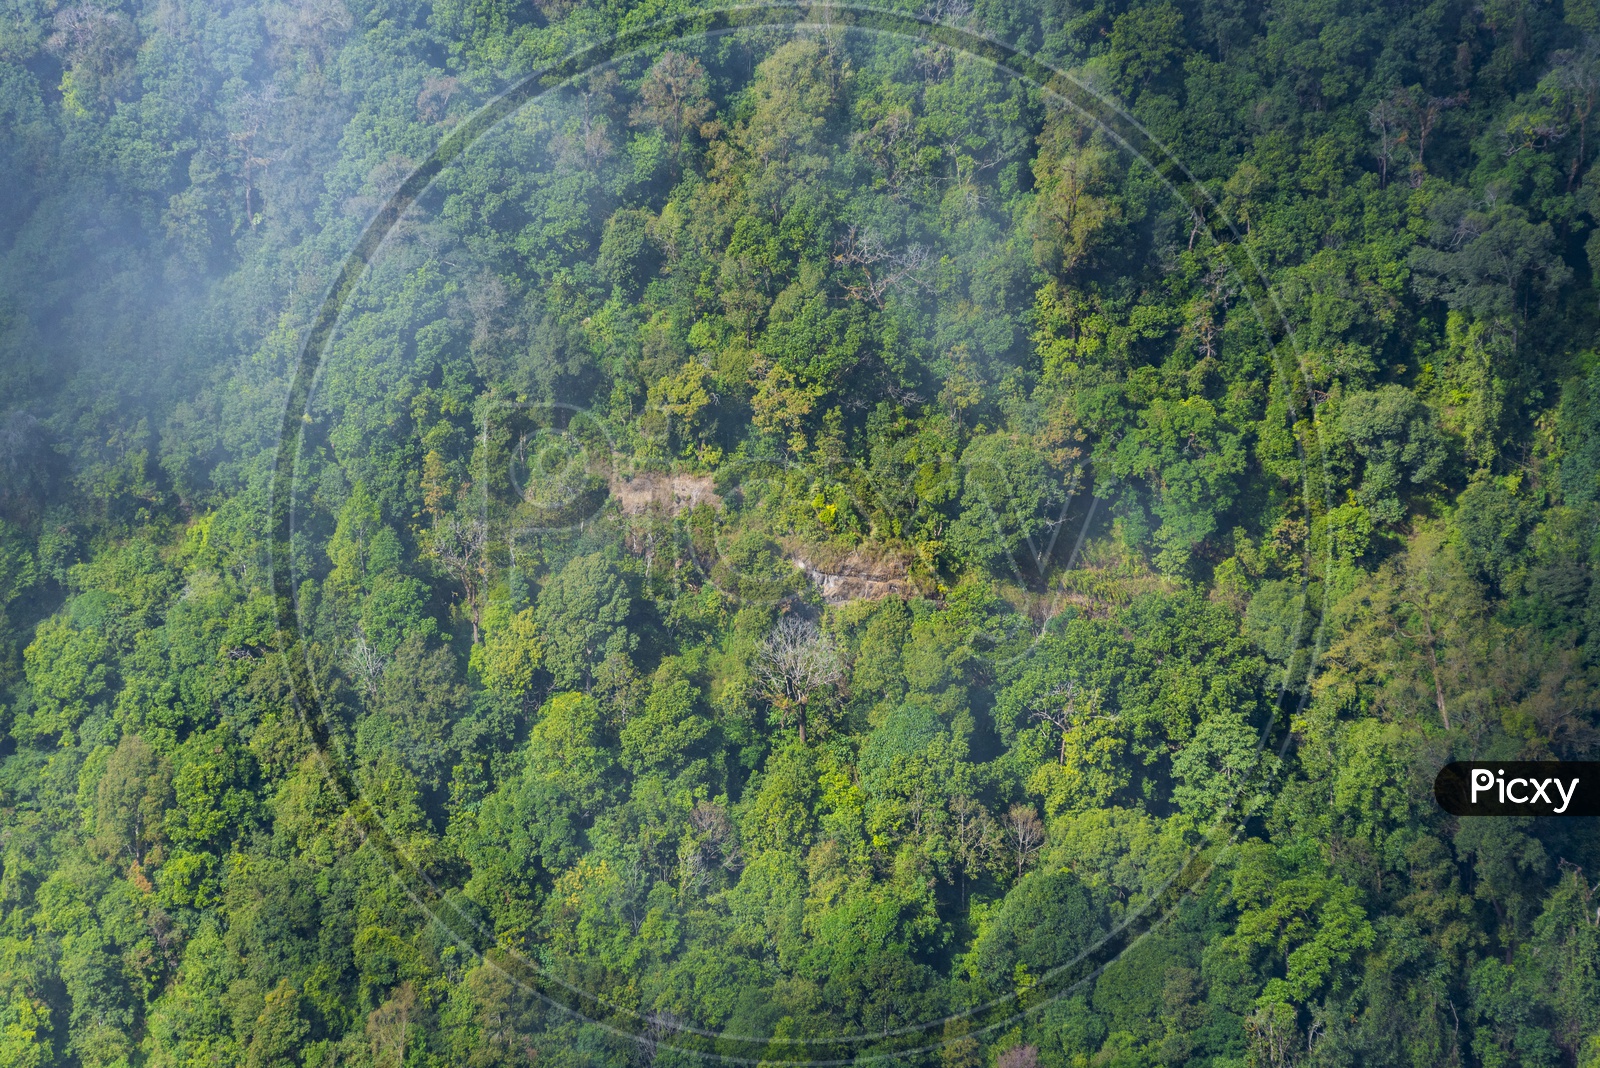 Bird eyes view of Mountains, Trees, and greenery of a deep forest